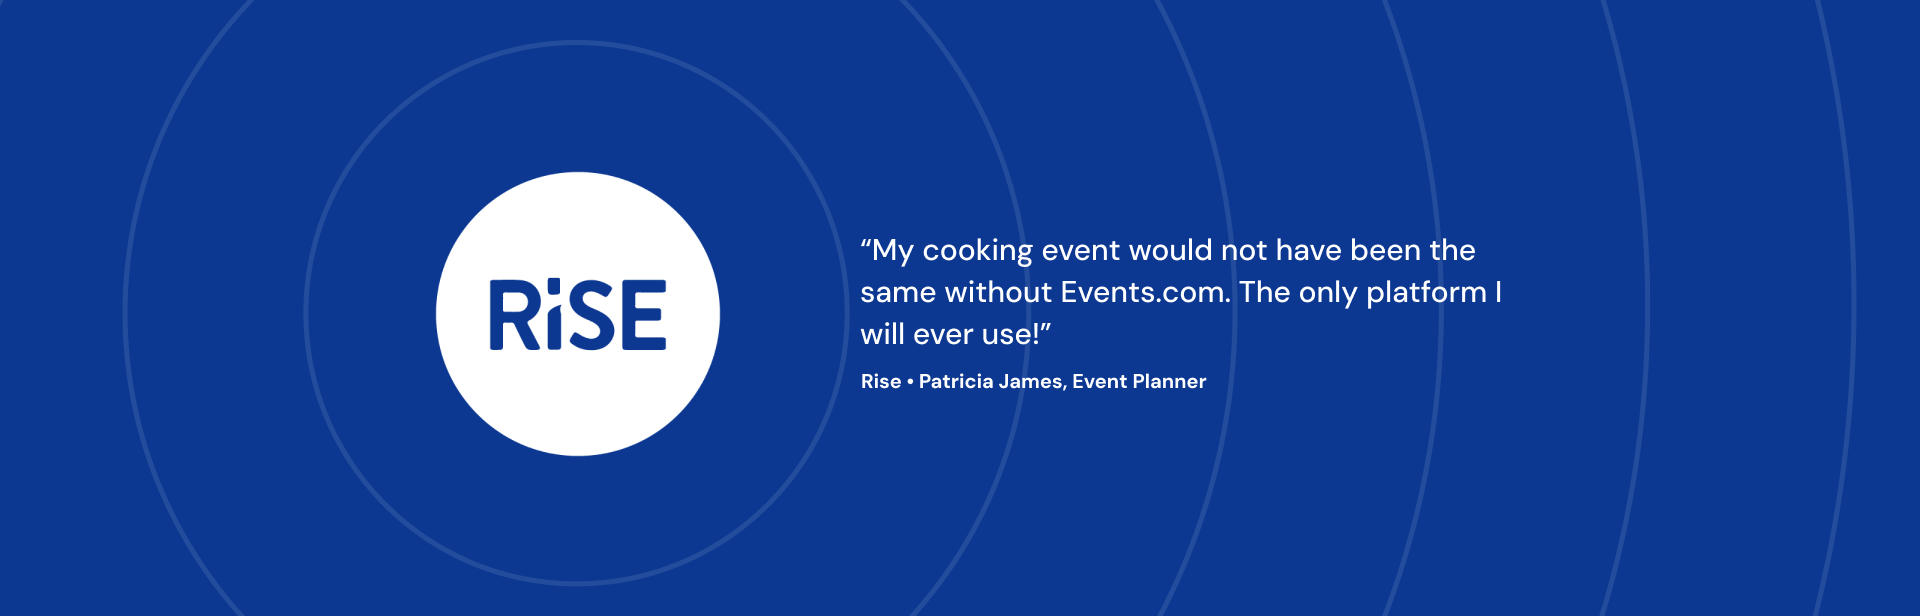 My cooking event would not have been the same without Events.com. The only platform I will ever use! Rise Patricia James, Event Planner